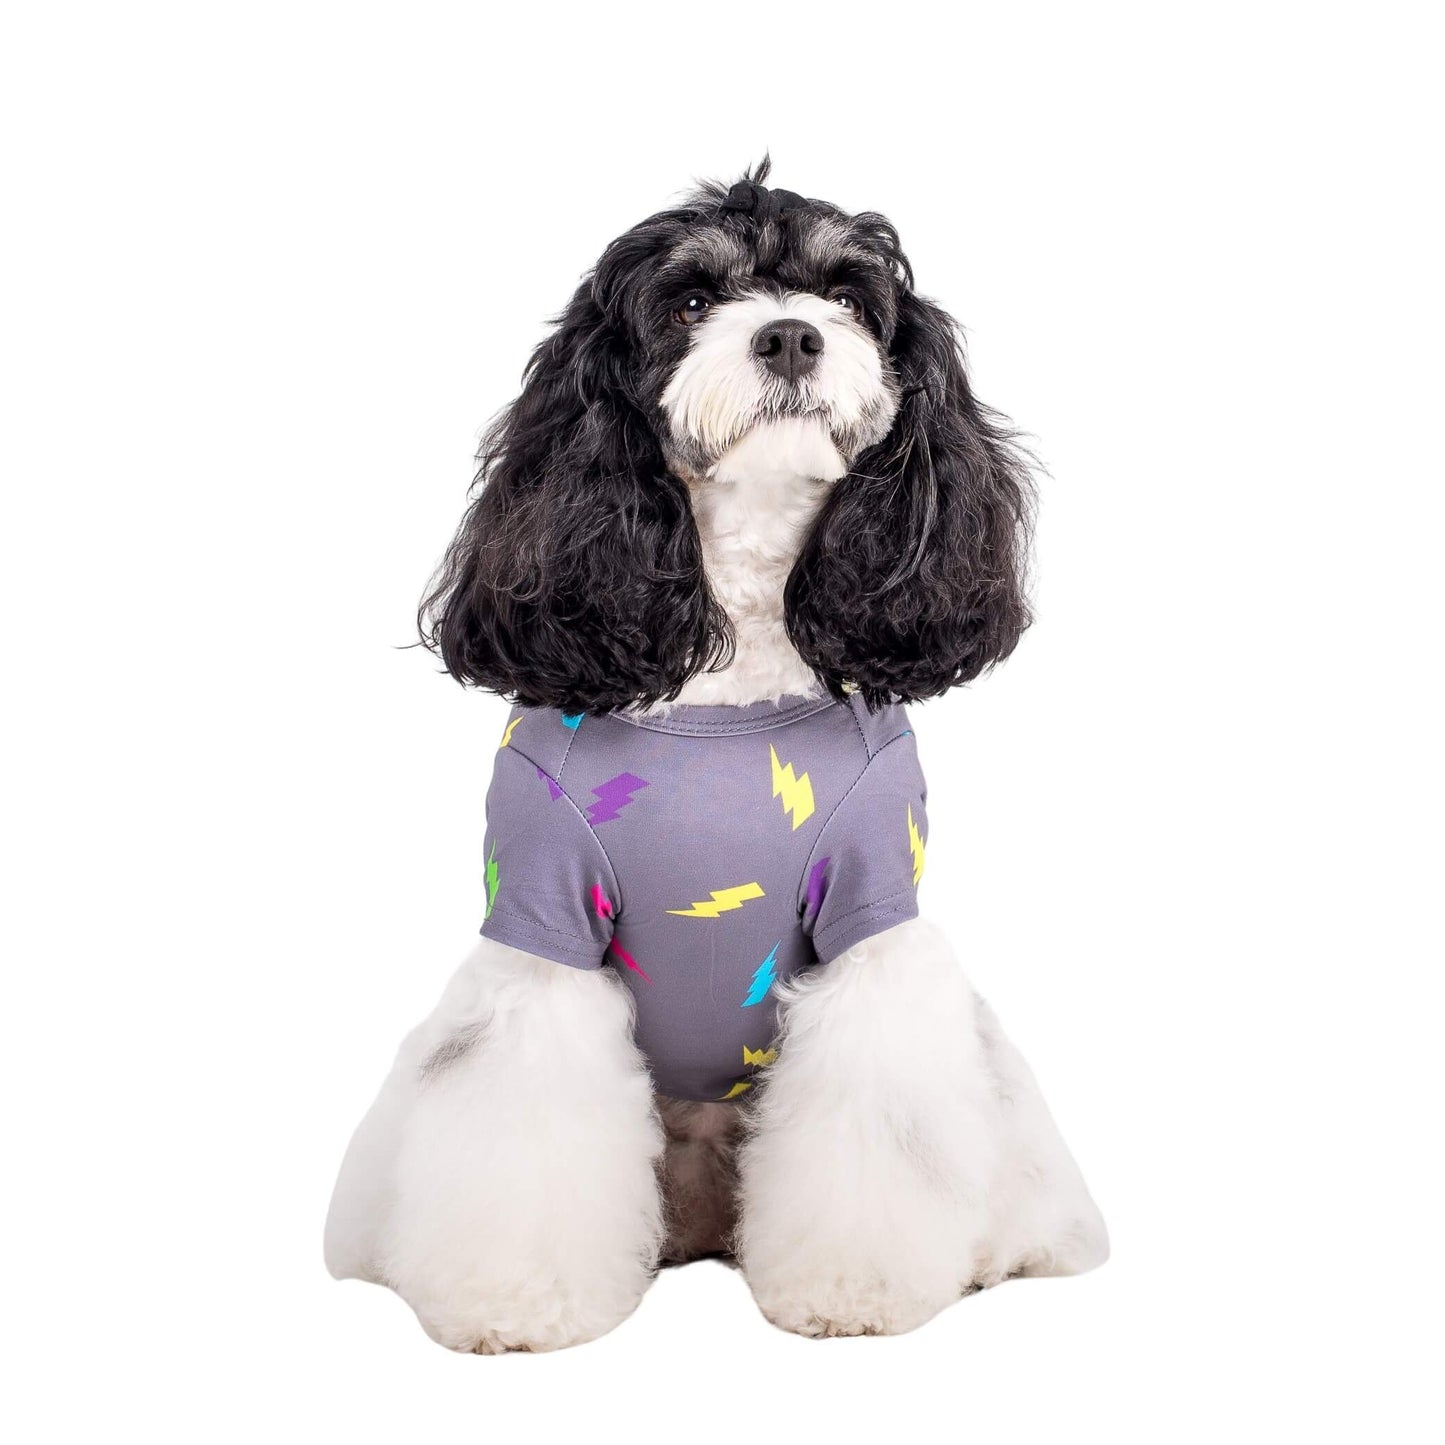 Rosie the cavoodle wearing an Electric Energy dog shirt made by Vibrant Hound. This dog shirt is grey with bright coloured lightning bolts printed on it.